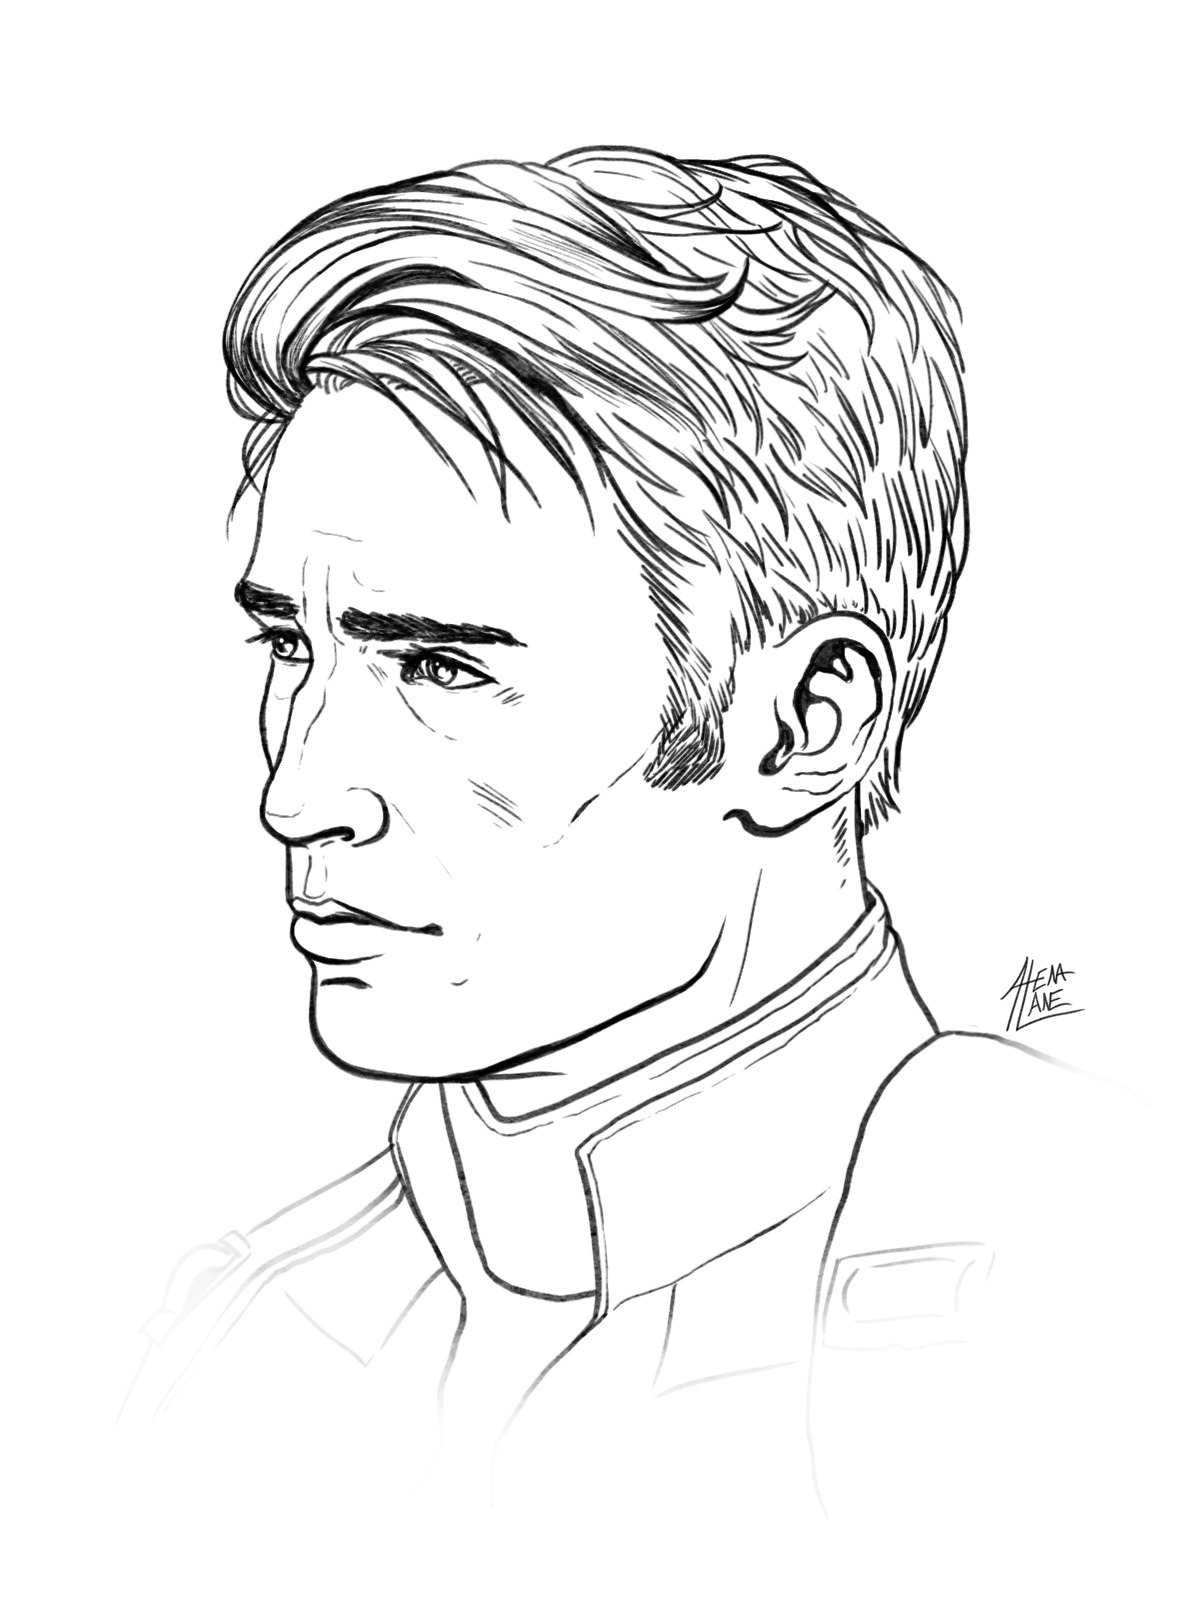 Sketches of Steve Rogers  Chapter 1  MusicalLuna  The Avengers Marvel  Movies Archive of Our Own